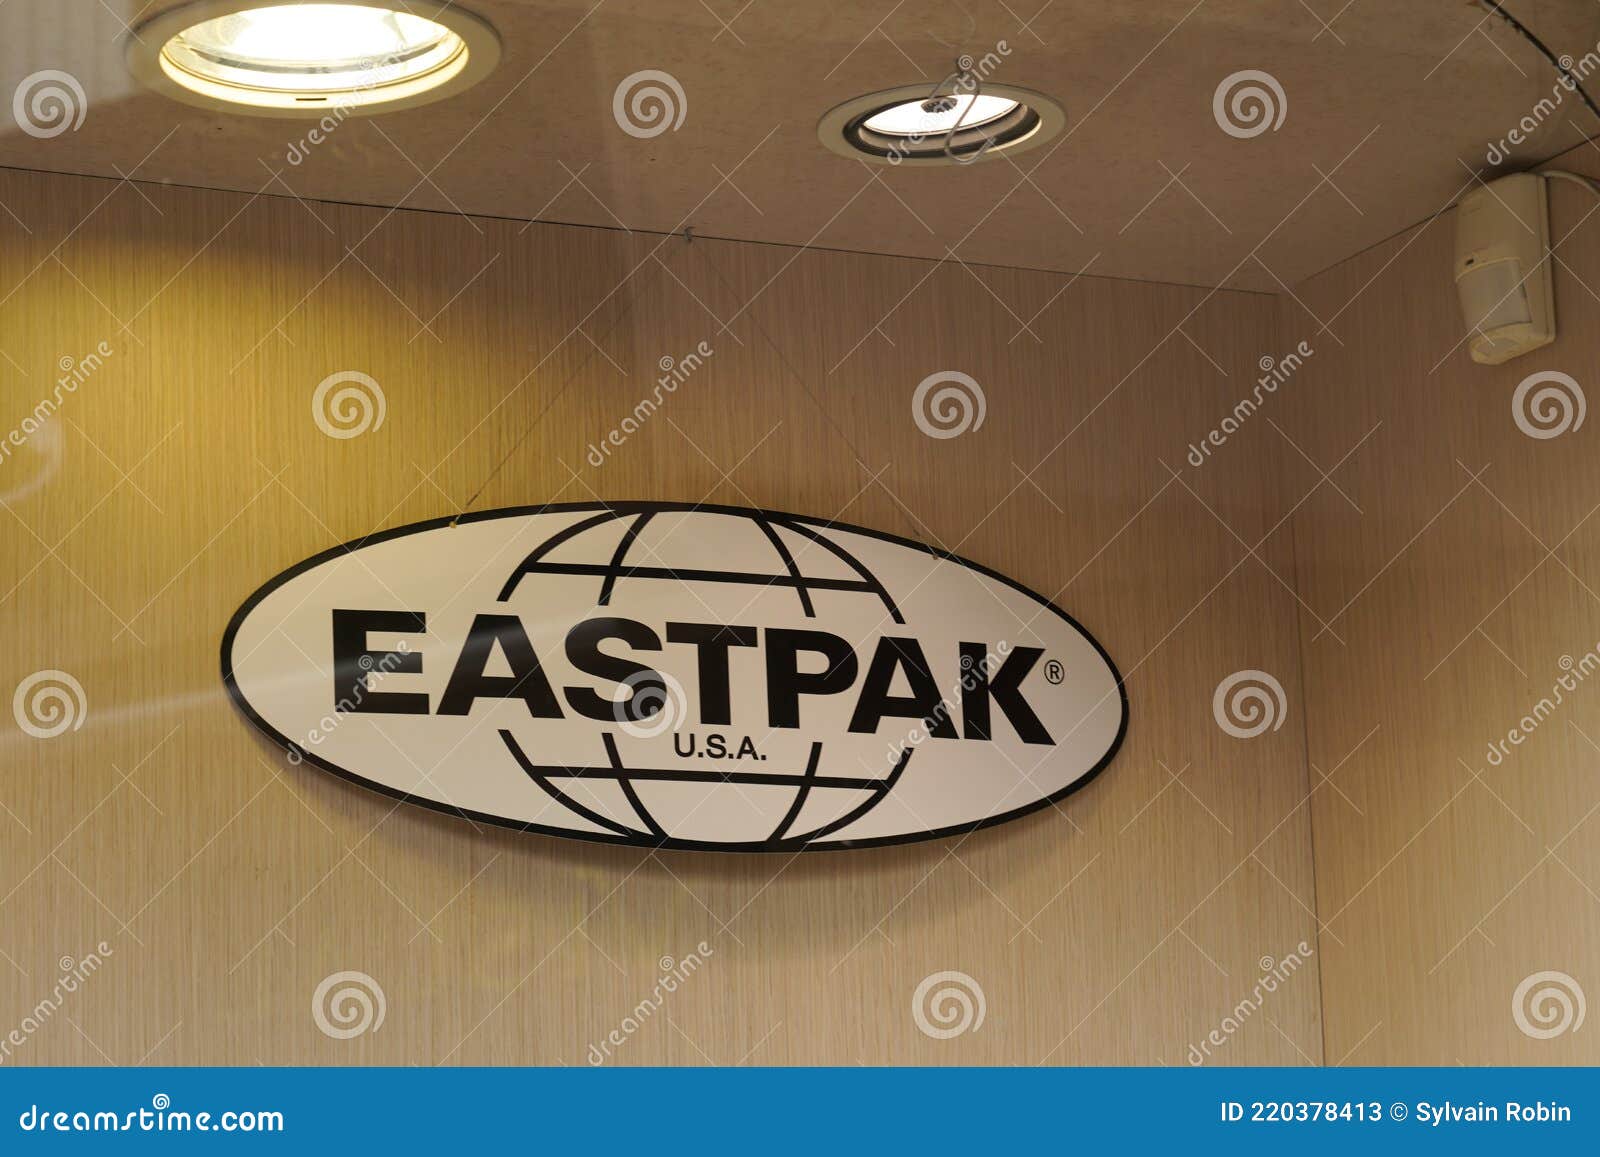 Shop Sign Bags Store Brand Text in Windows Boutique Editorial Stock - Image of commercial, american: 220378413